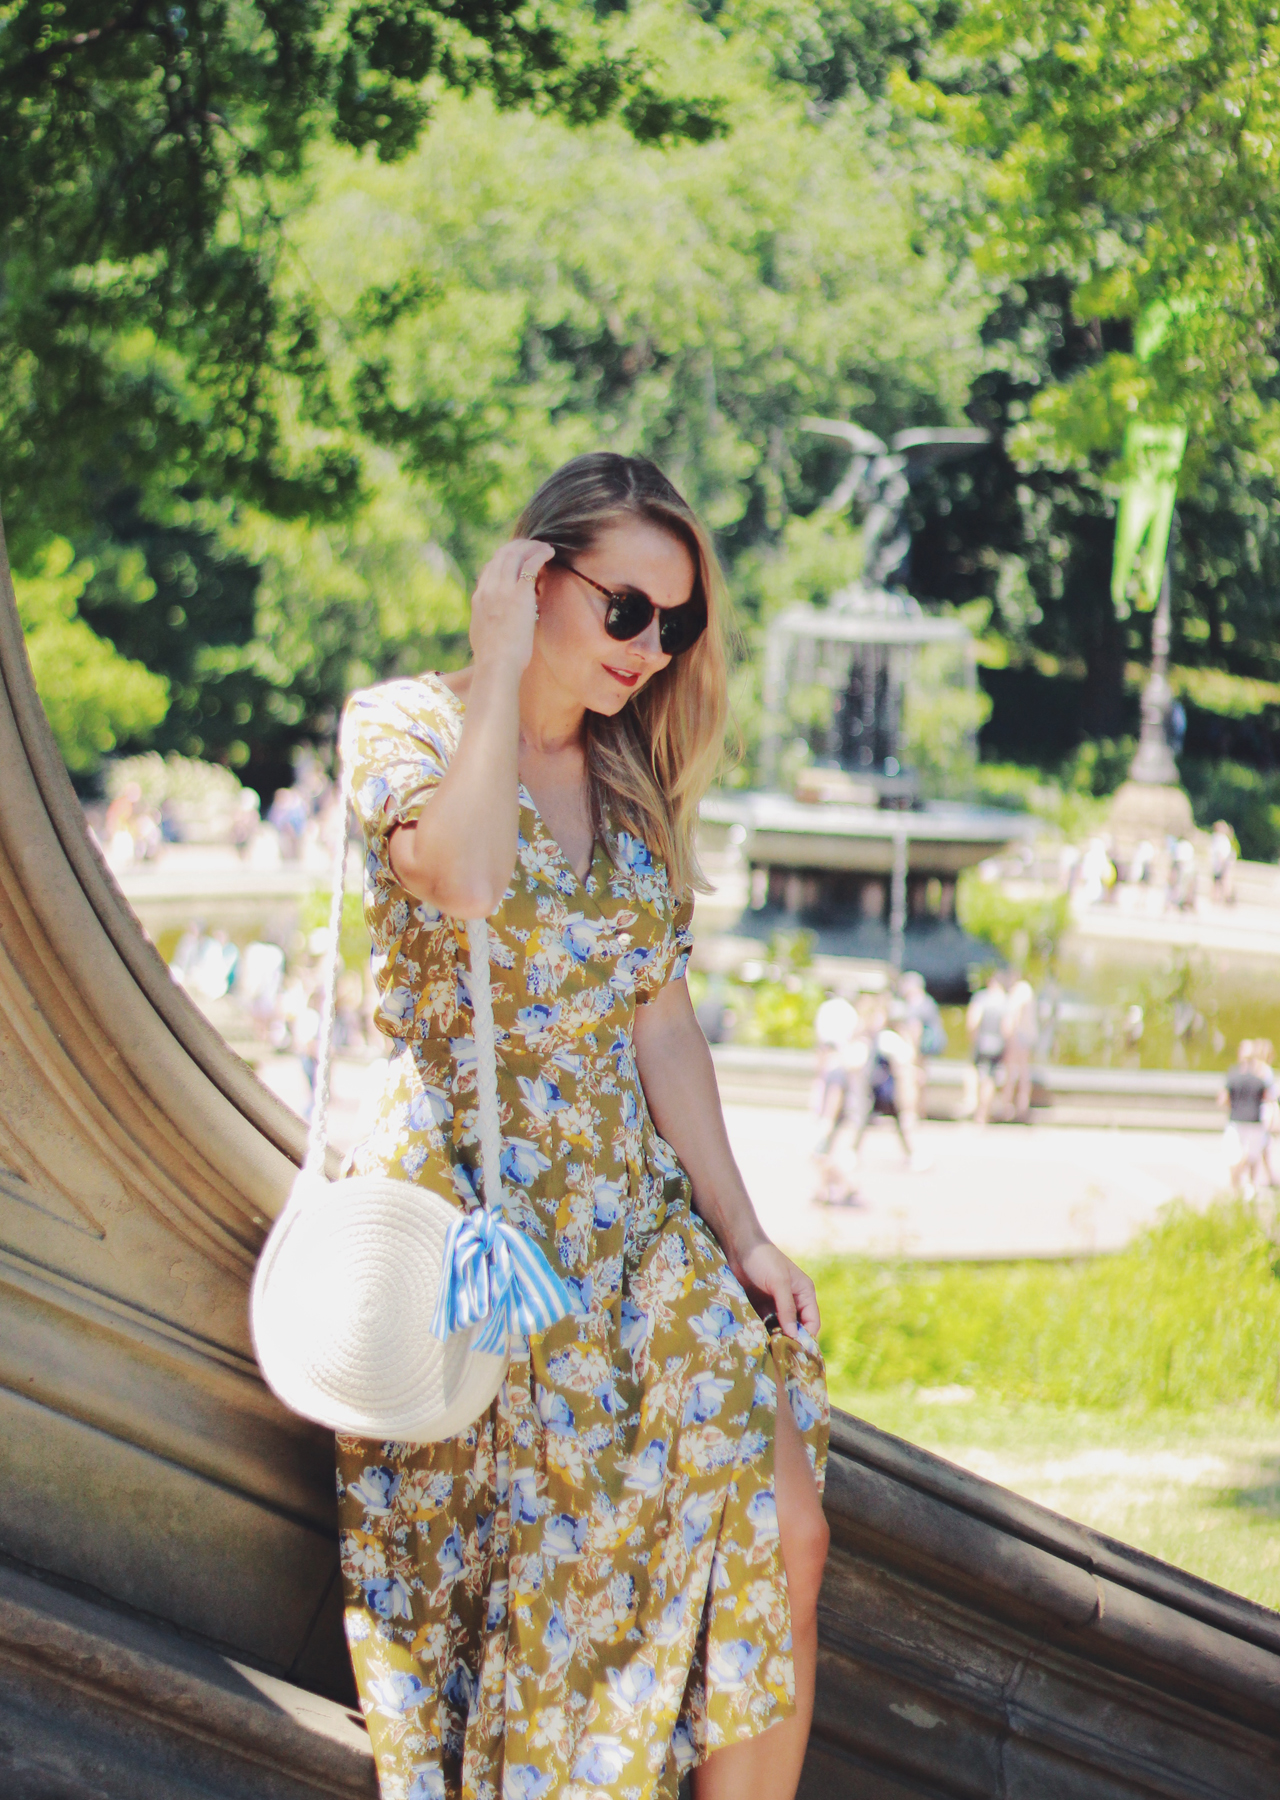 FLORAL MIDI DRESS IN CENTRAL PARK – Fashion, Travel & Lifestyle.